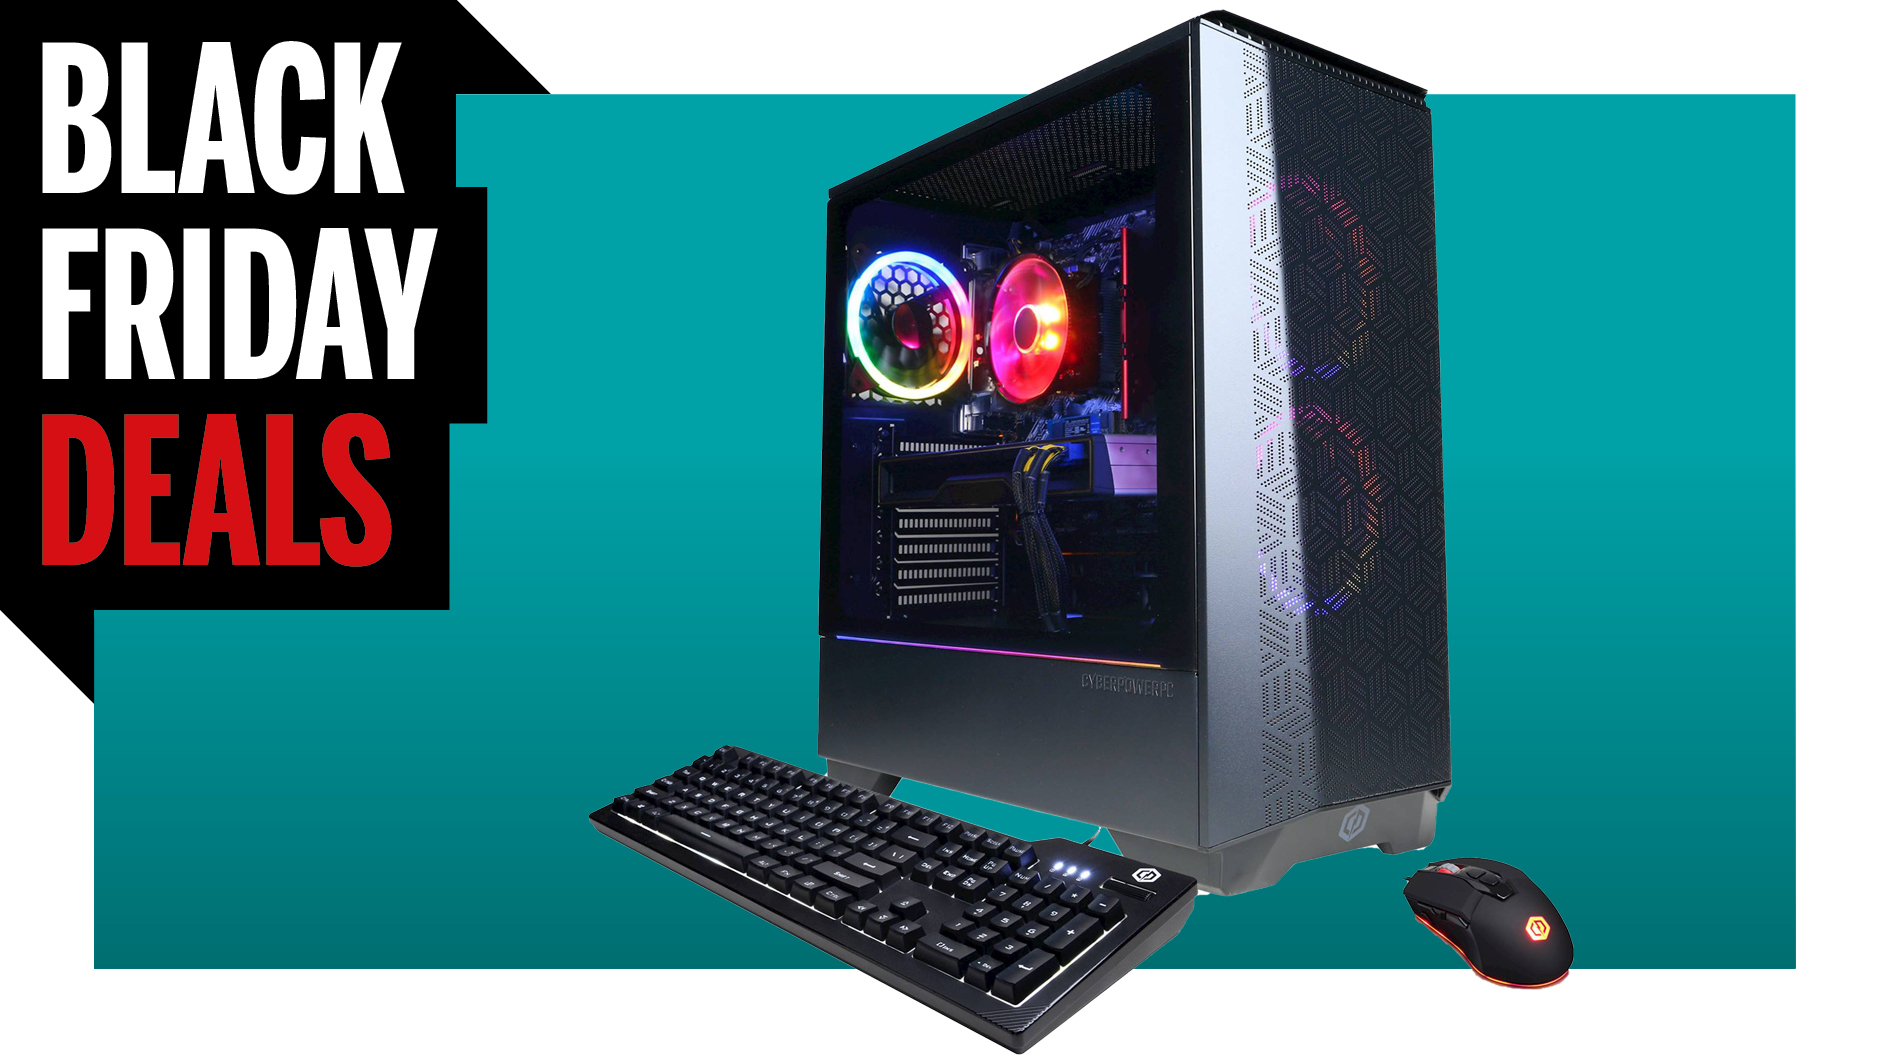 Grab This CyberPowerPC Desktop With A Ryzen 5 3600 And RX 6600 XT For $1000 thumbnail